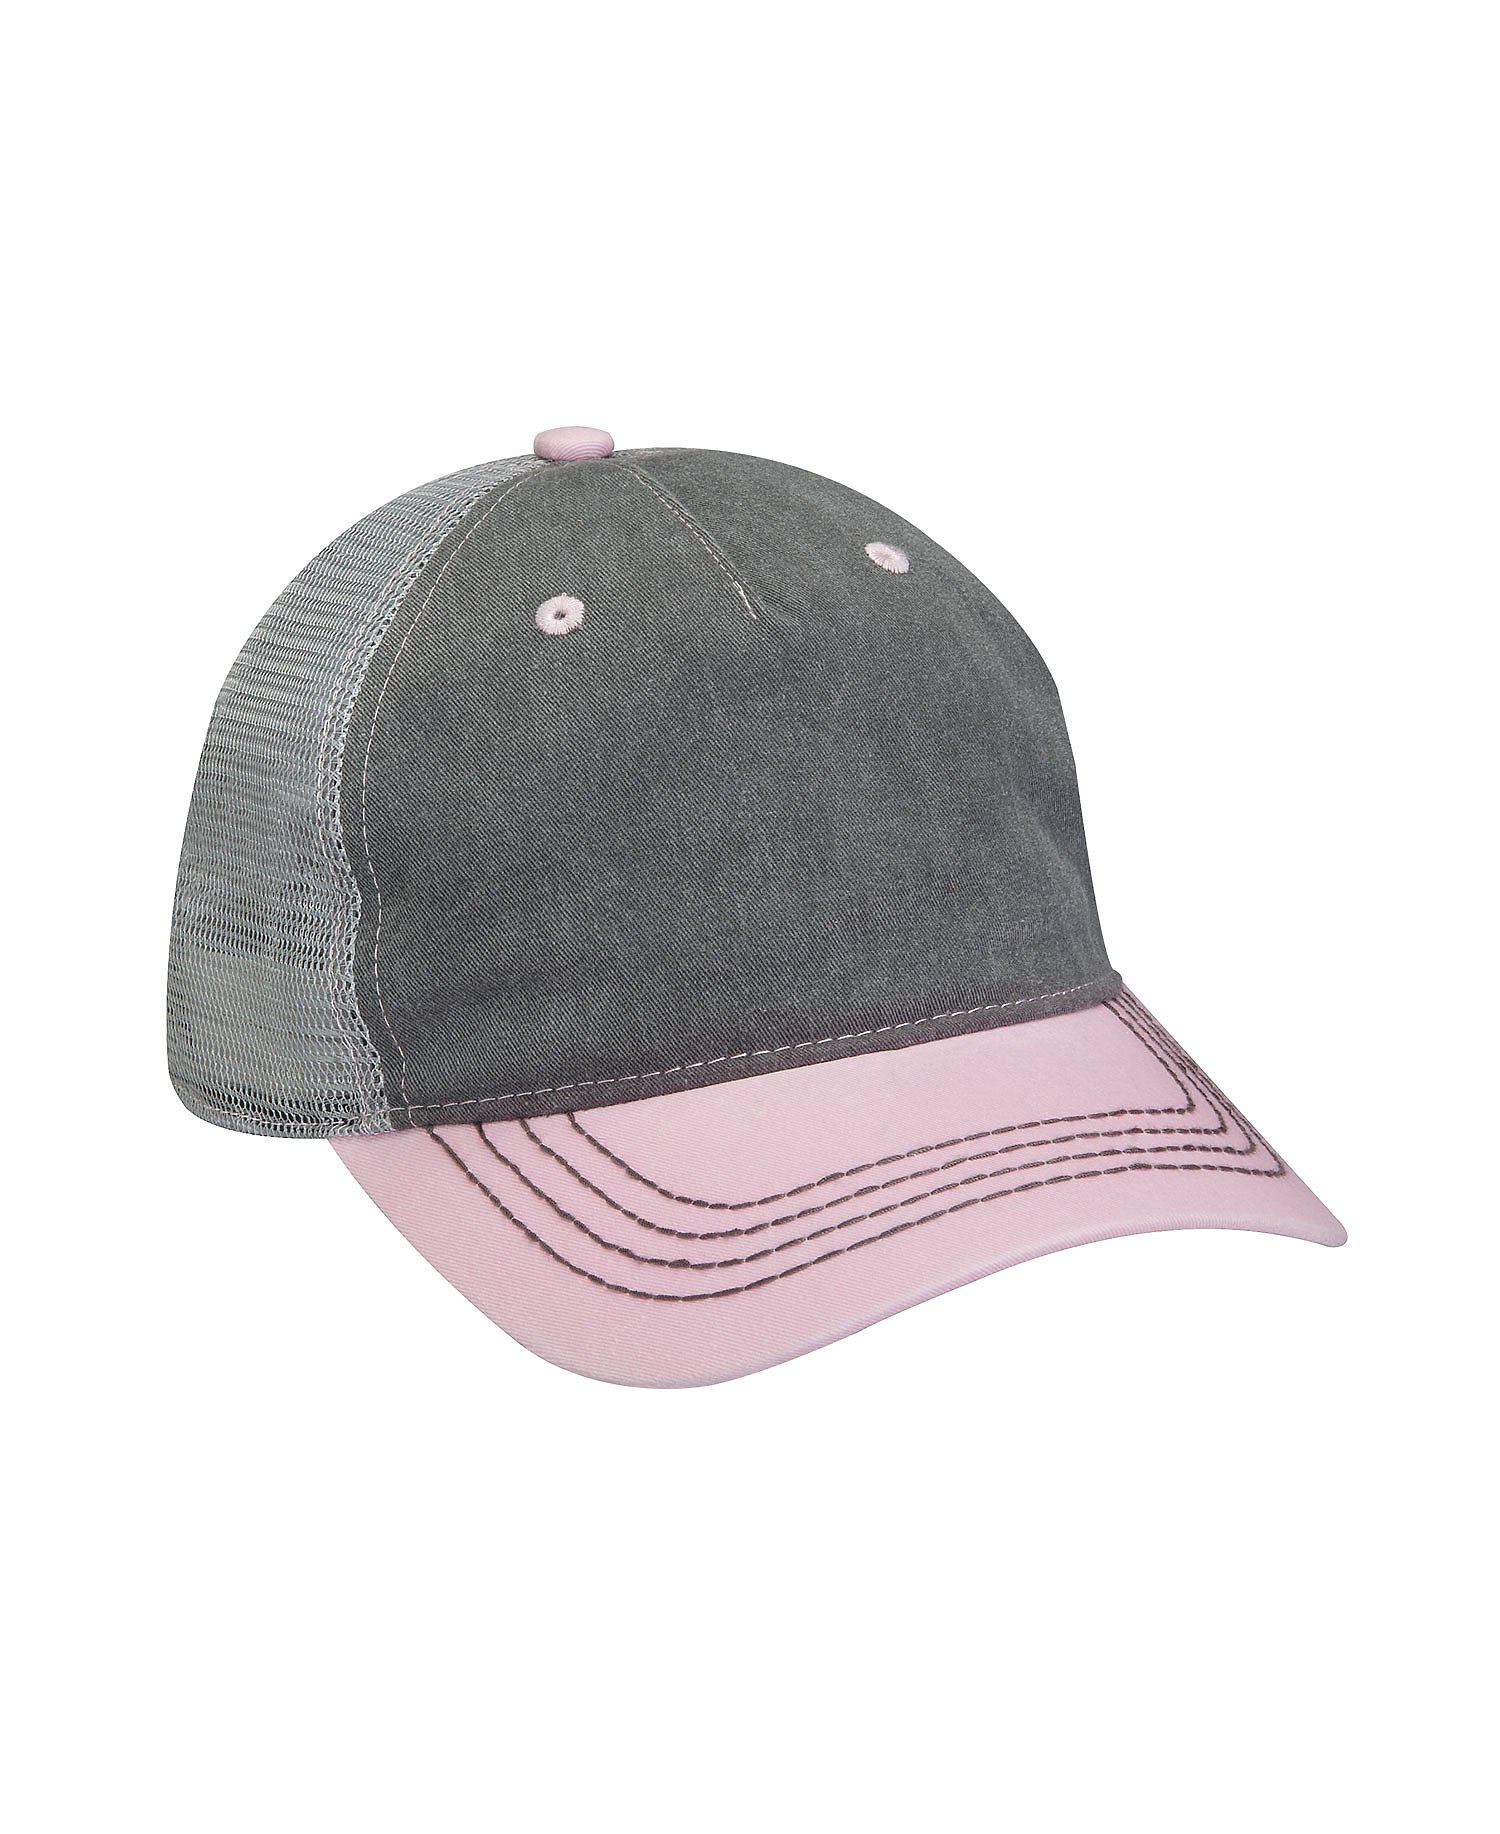 click to view Charcoal/ Pale Pink/ Gray